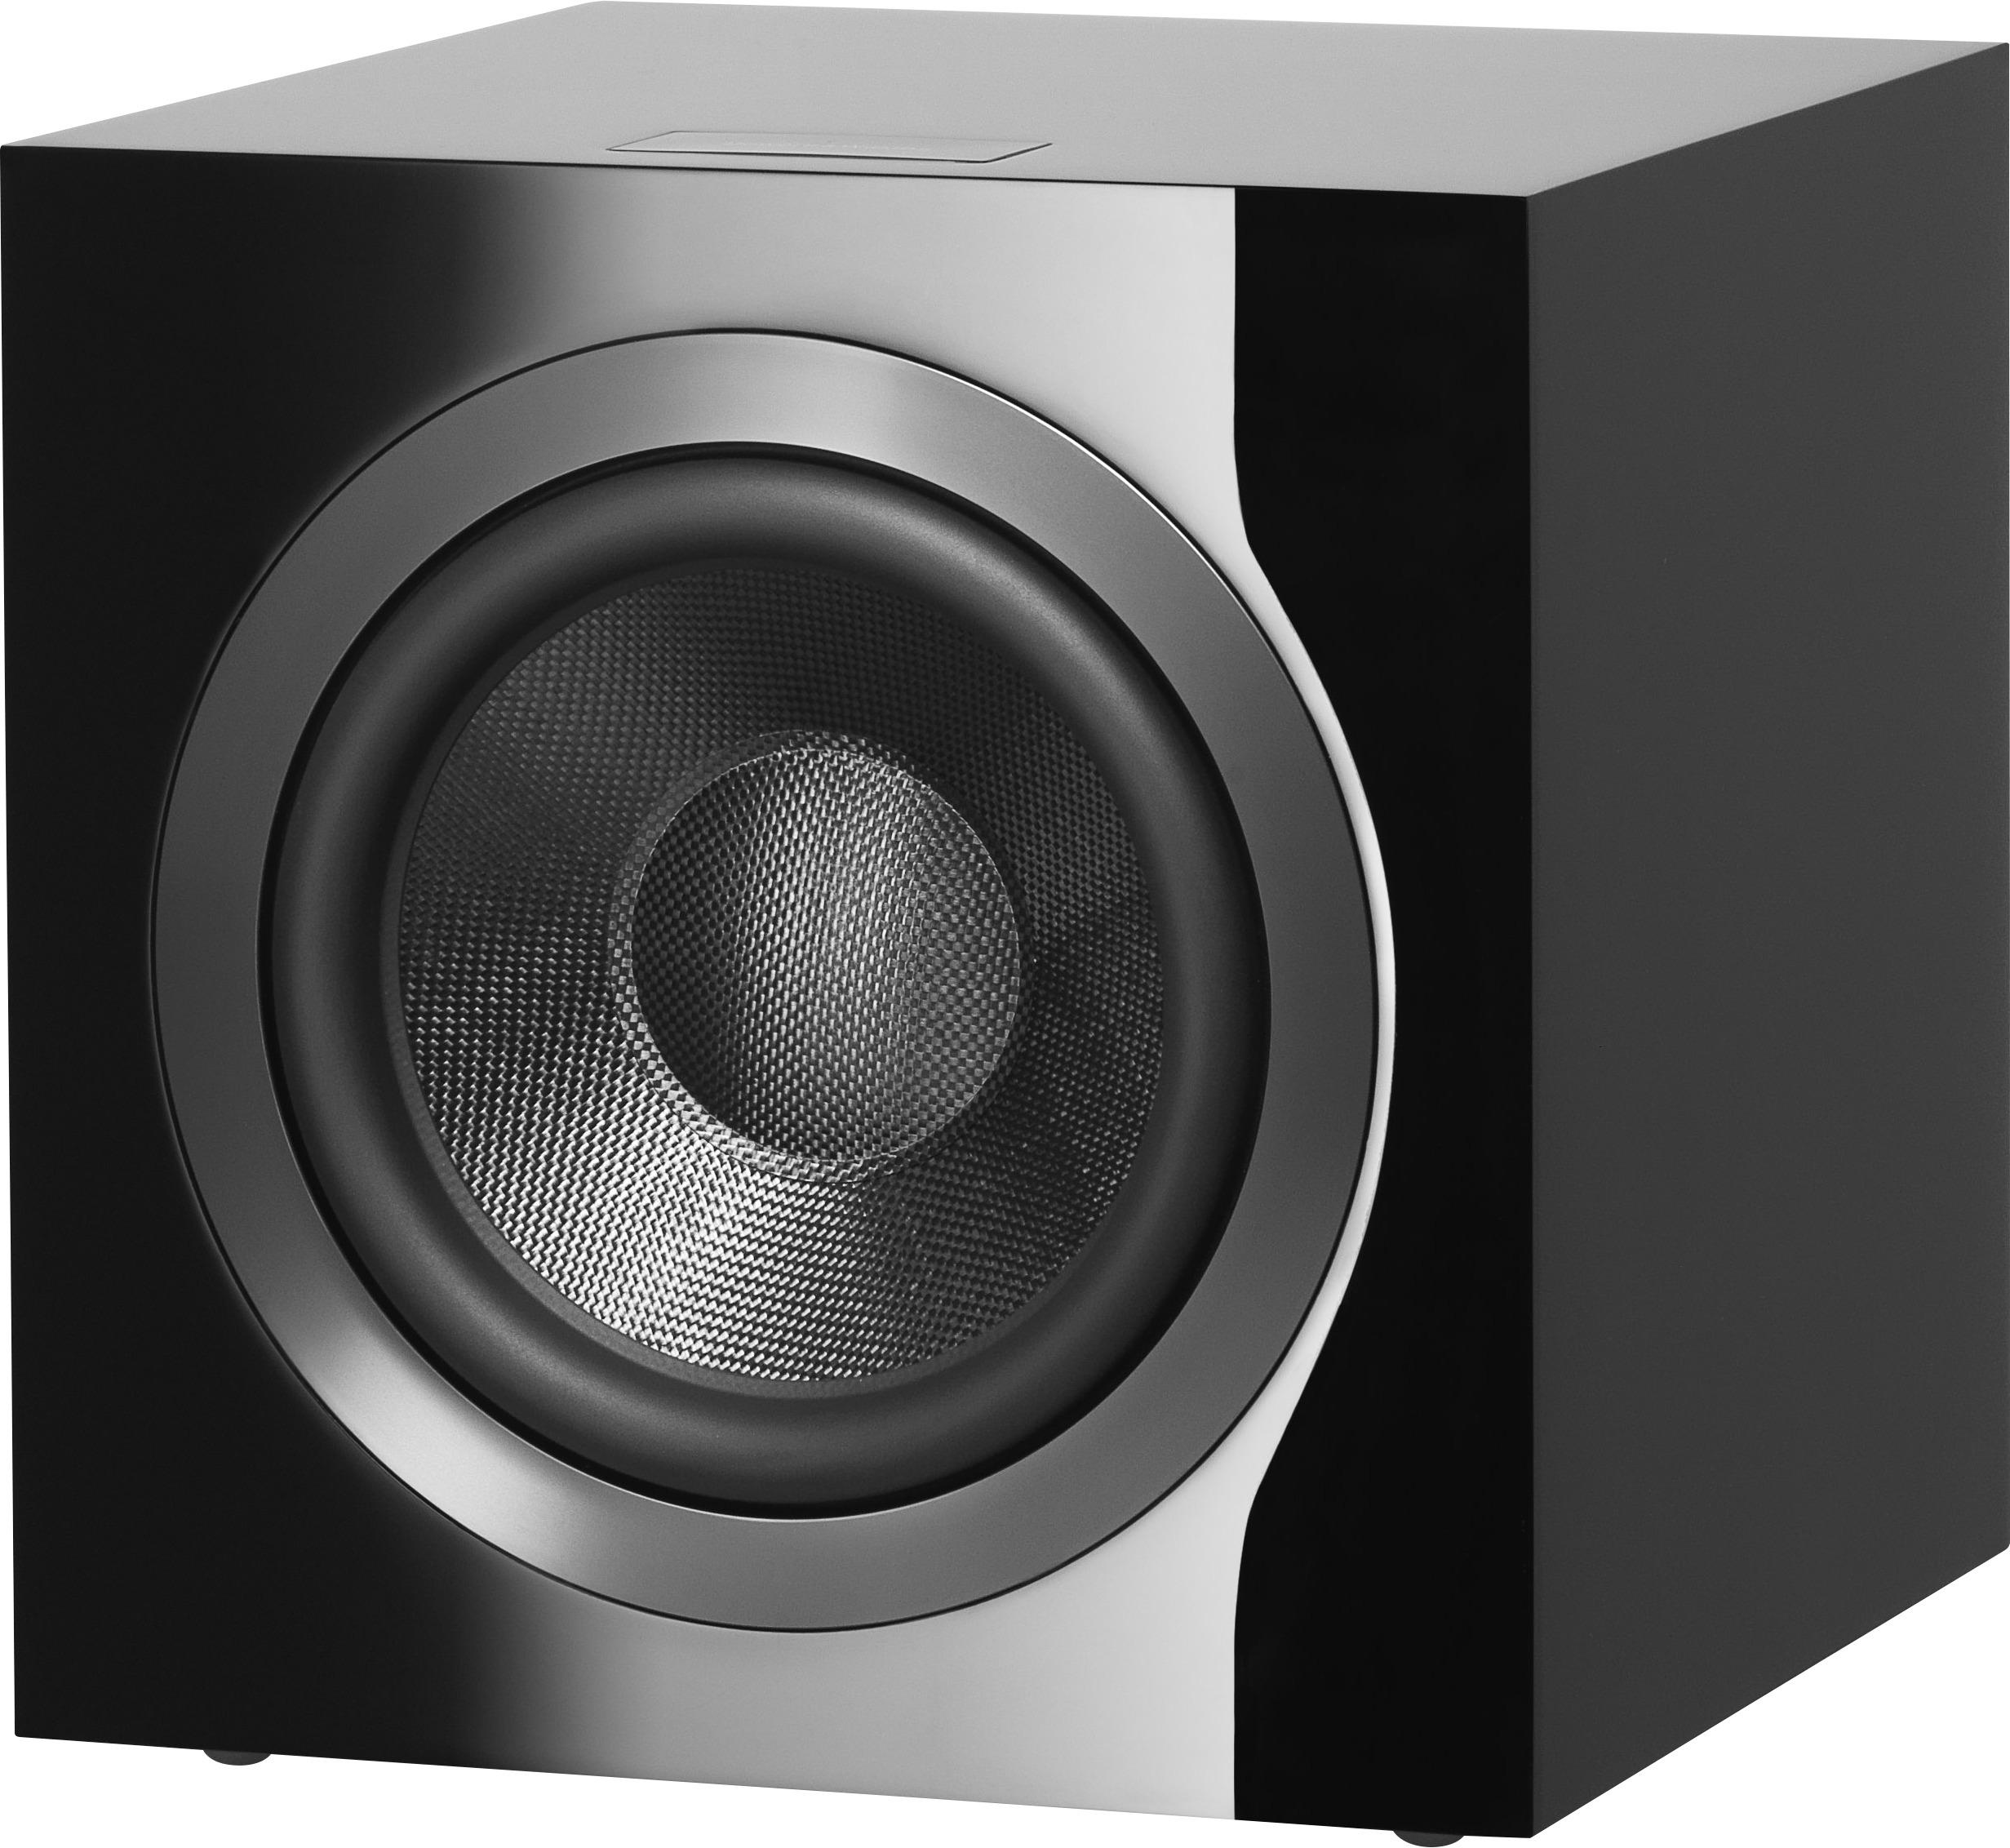 Bowers & Wilkins B&W ASW 700 Subwoofer in Cherry 10 500 Watts